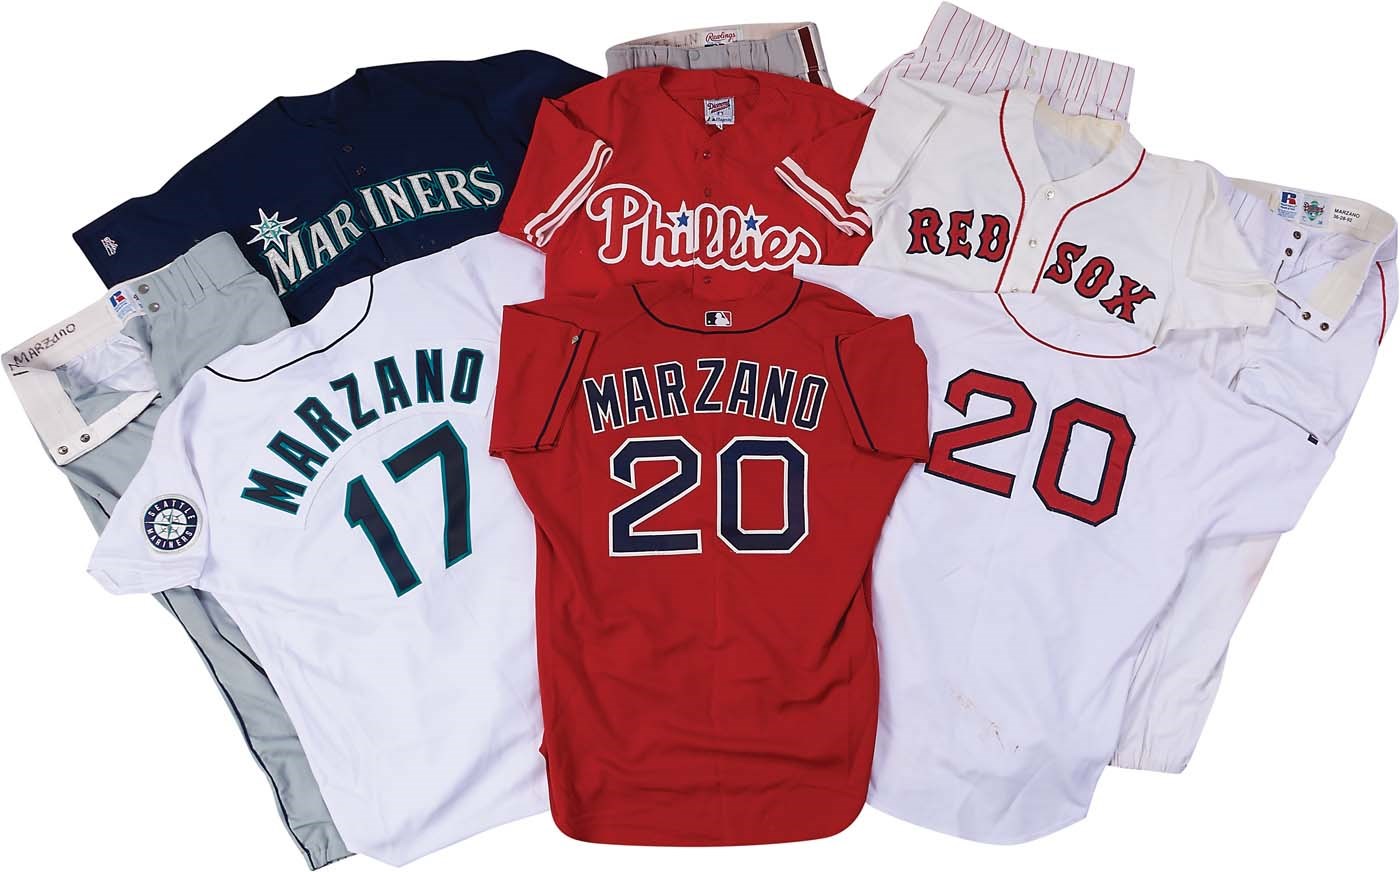 1980s-90s John Marzano Game Worn Jersey & Pants Collection (14)